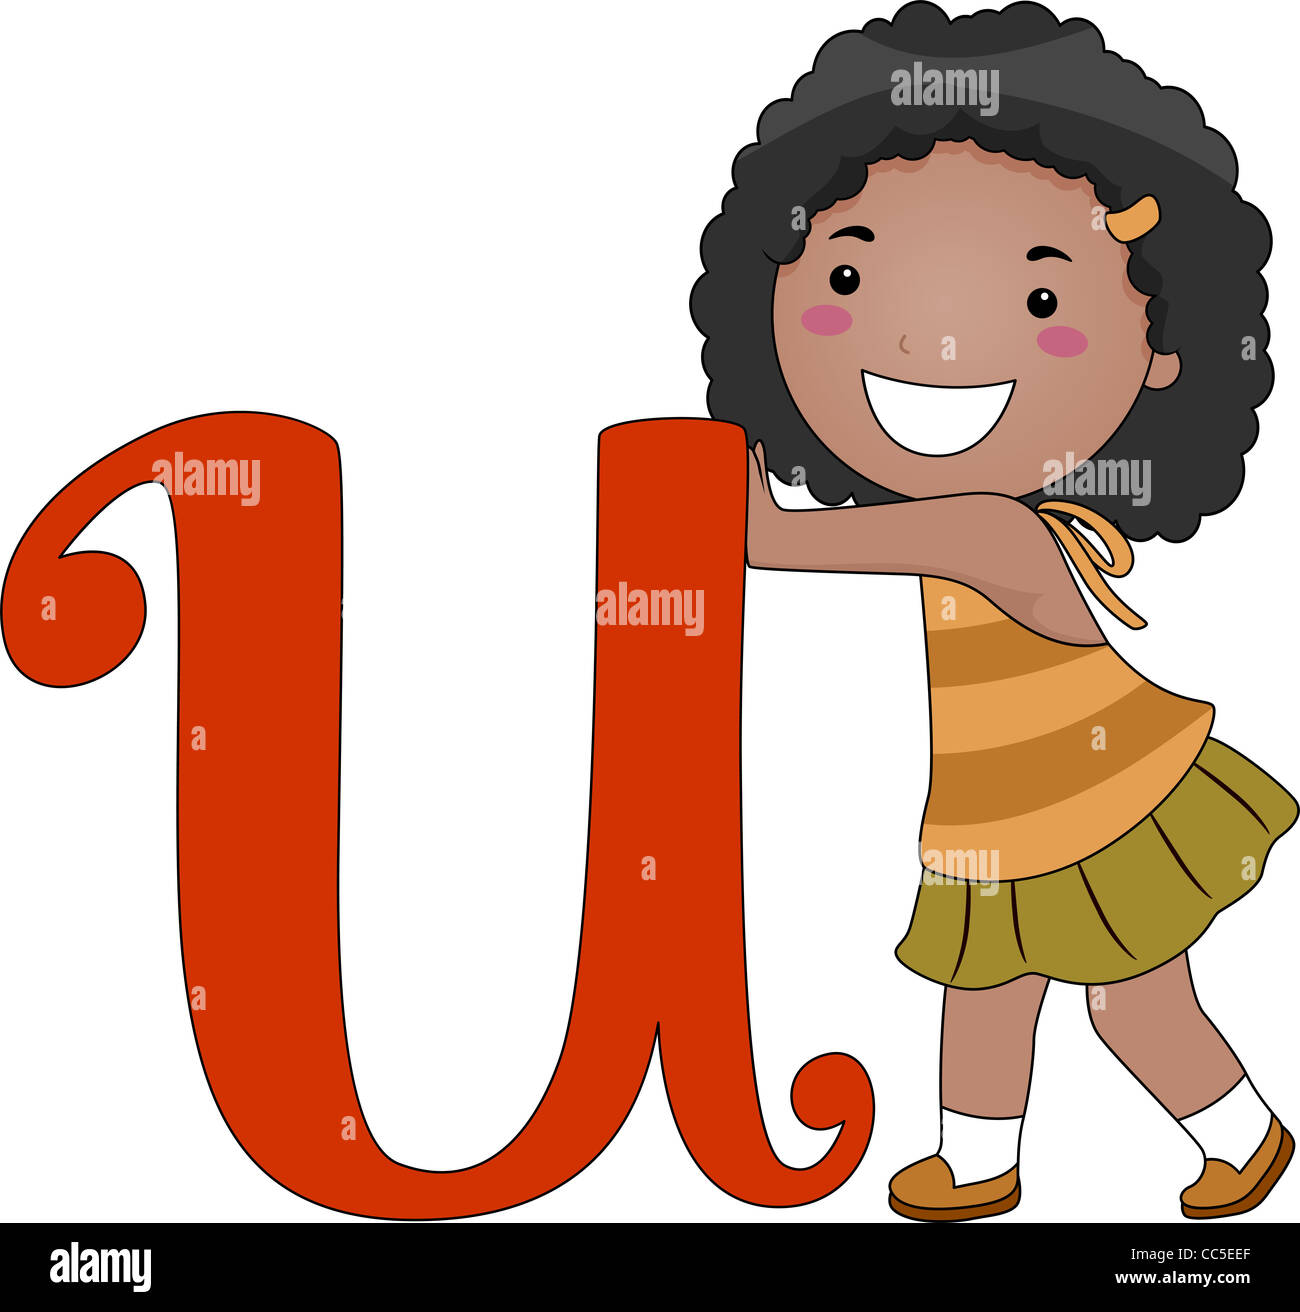 Illustration of a Kid Pushing the Letter U Stock Photo